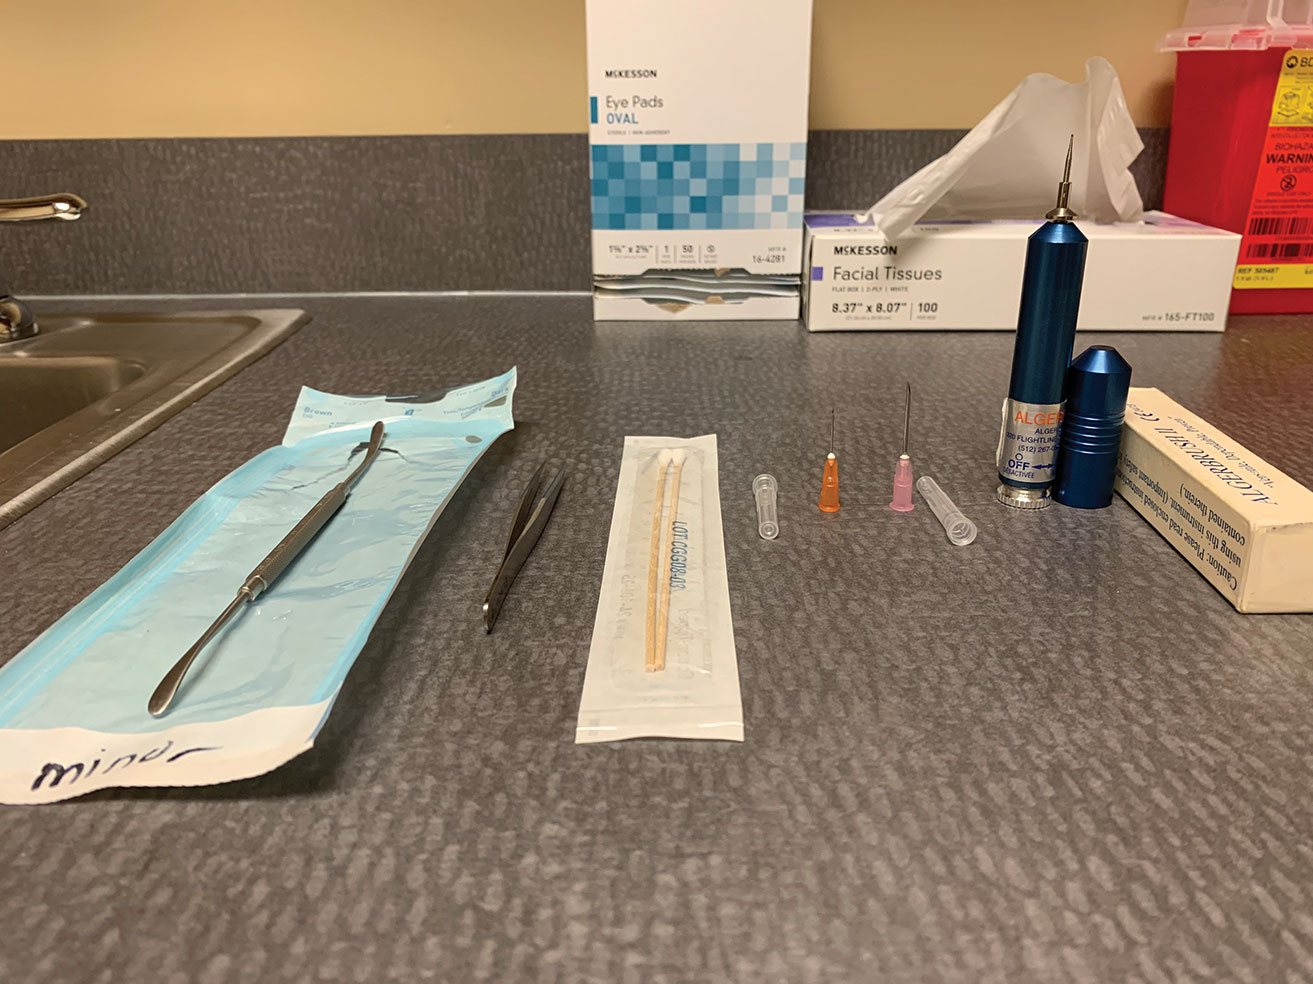 The foreign body removal toolkit includes a spud, jeweler’s forceps, cotton swabs, small-gauge needles and an Alger brush.